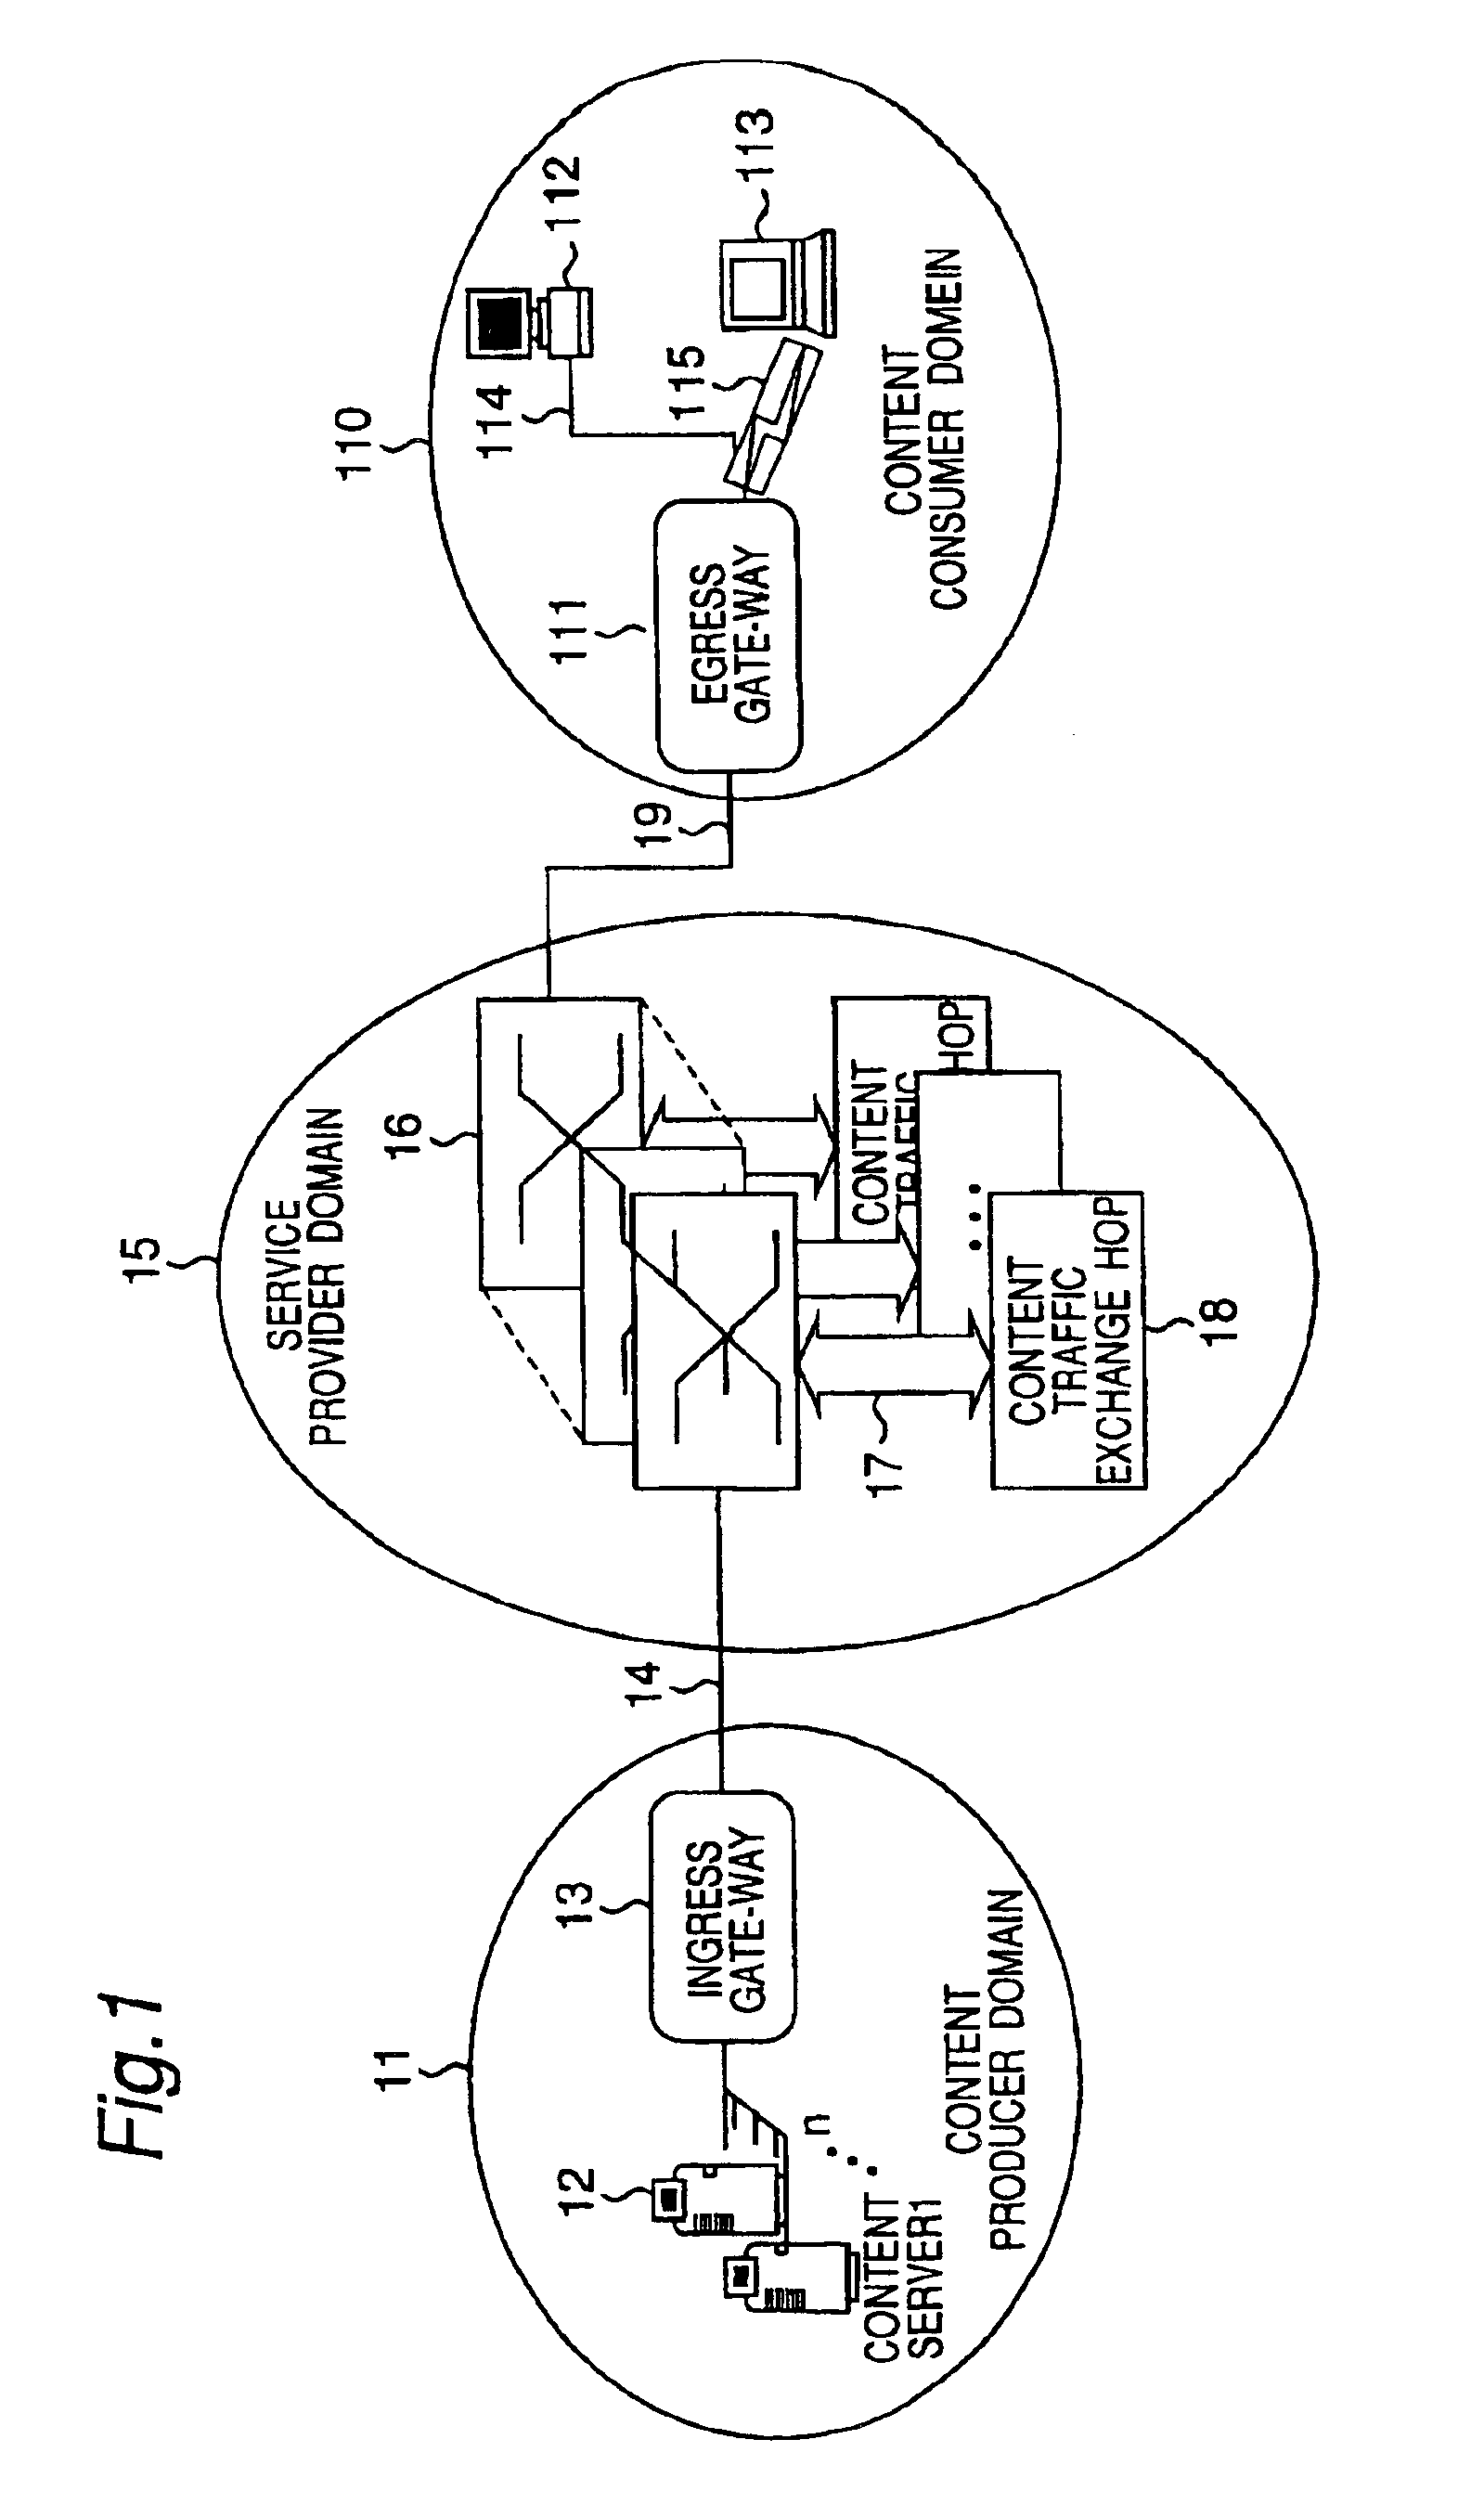 Time based multimedia objects streaming apparatus and method